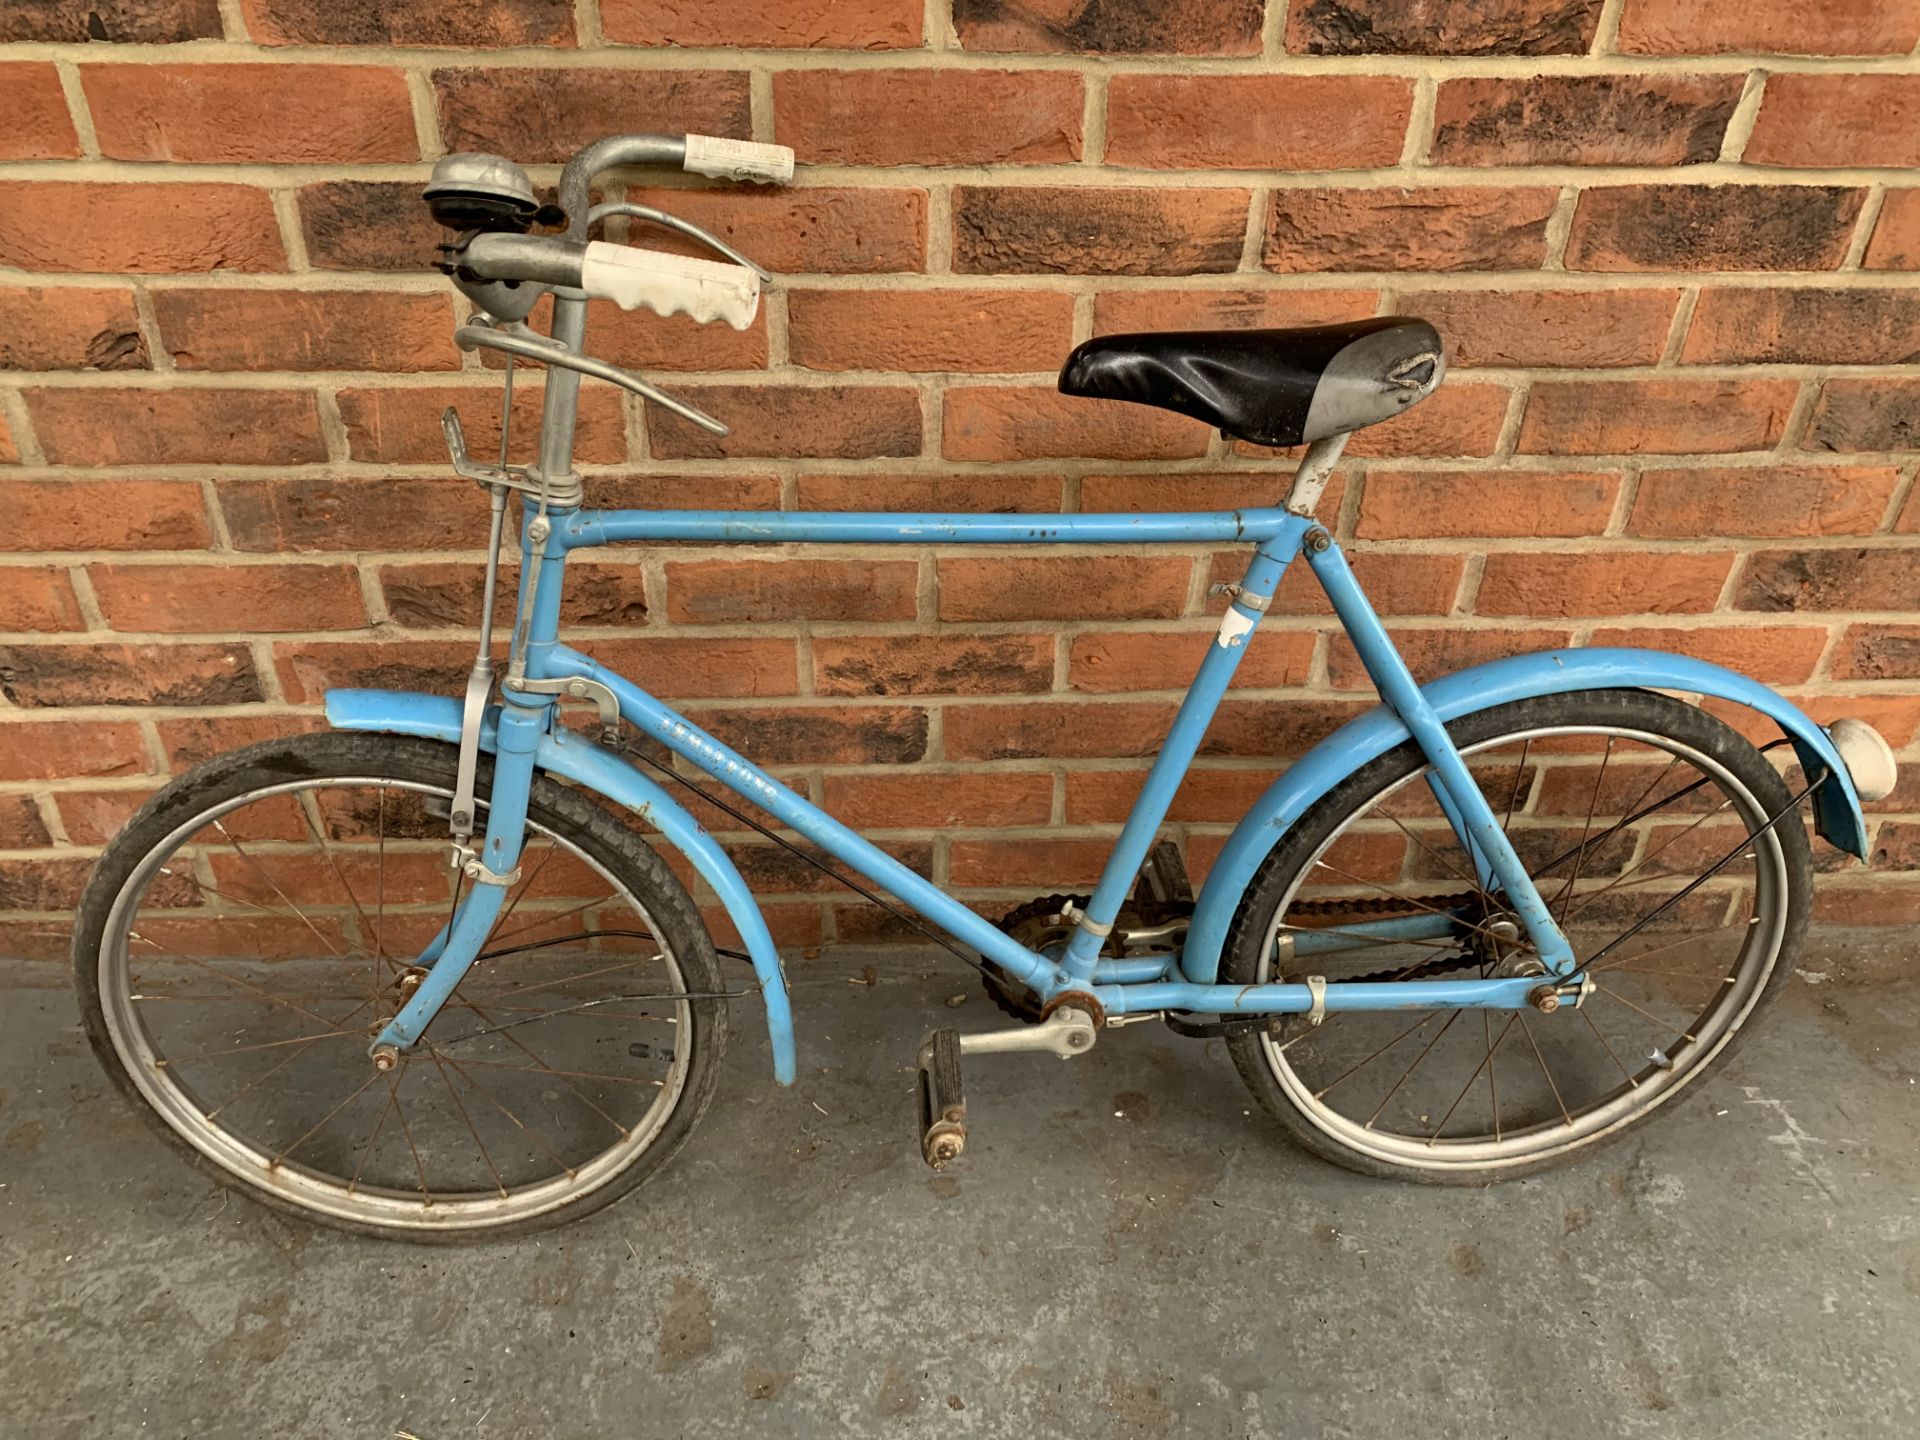 Two Vintage Blue Framed Child Bikes With Rod Brakes - Image 2 of 3